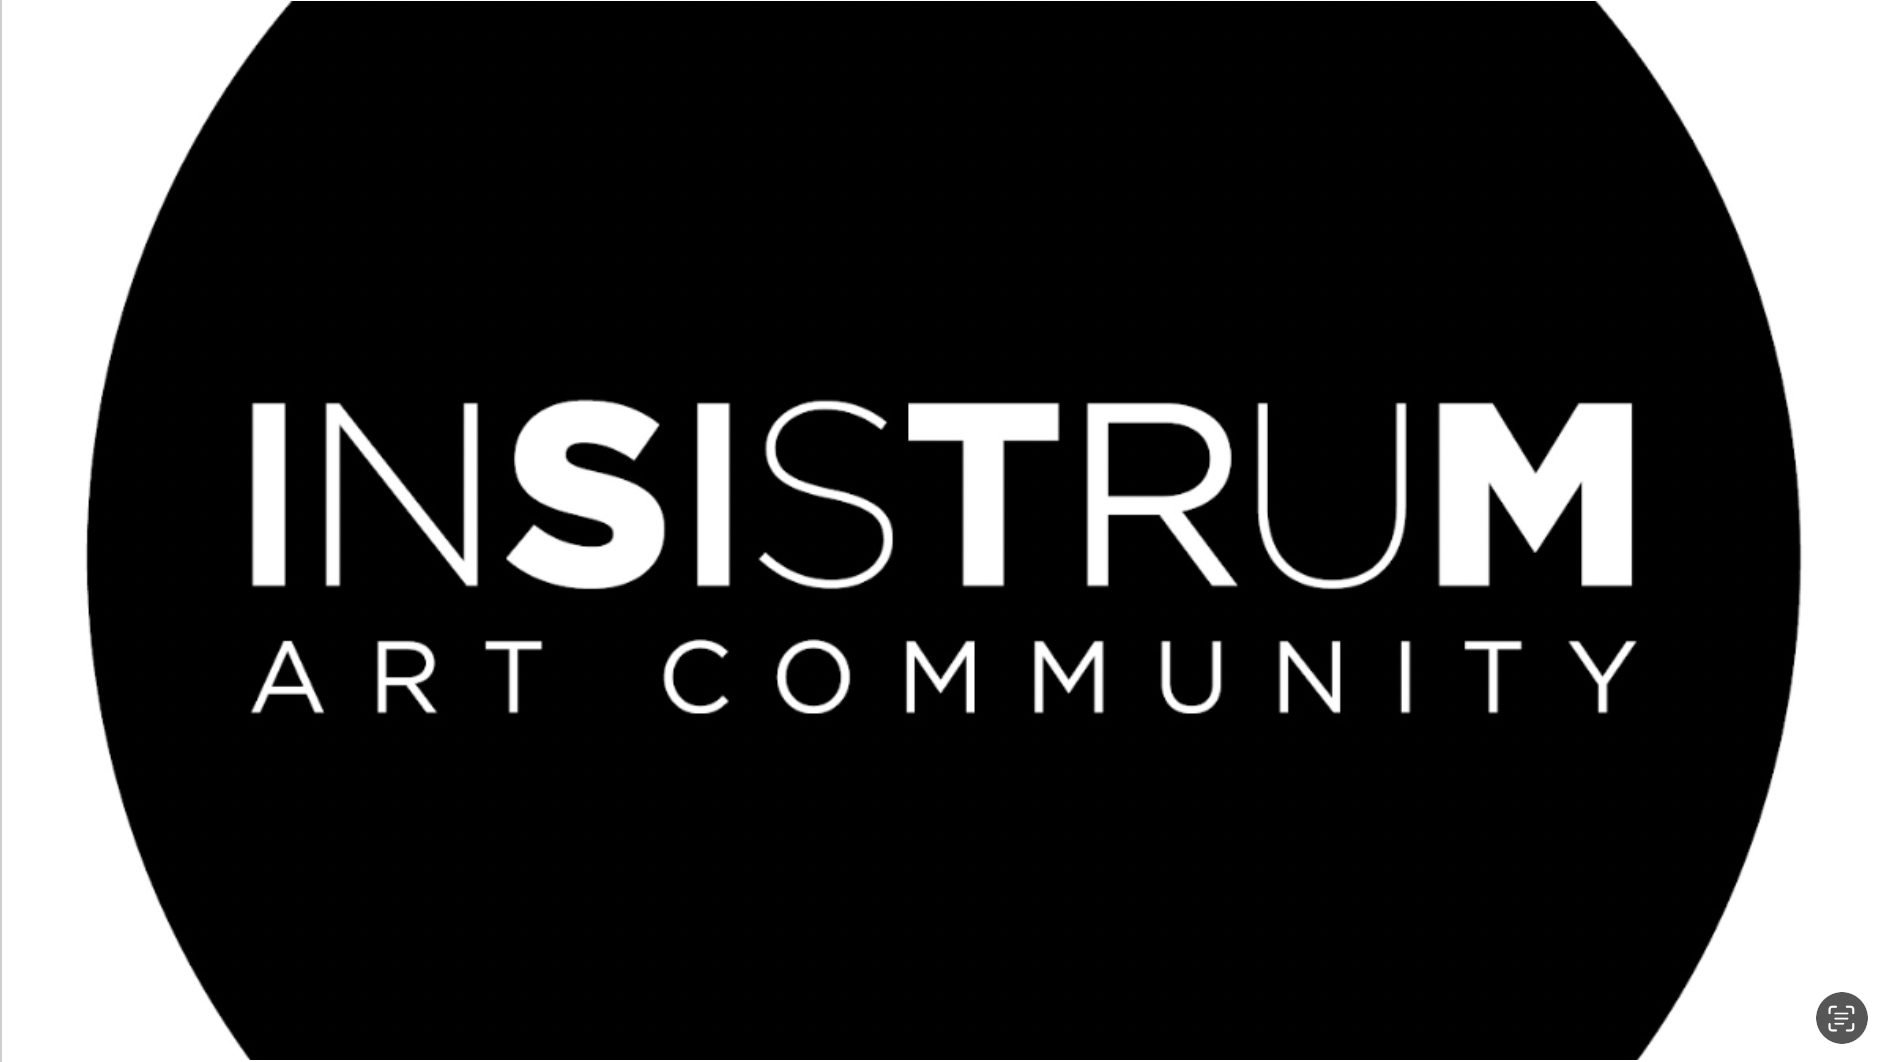 Curated by Insistrum